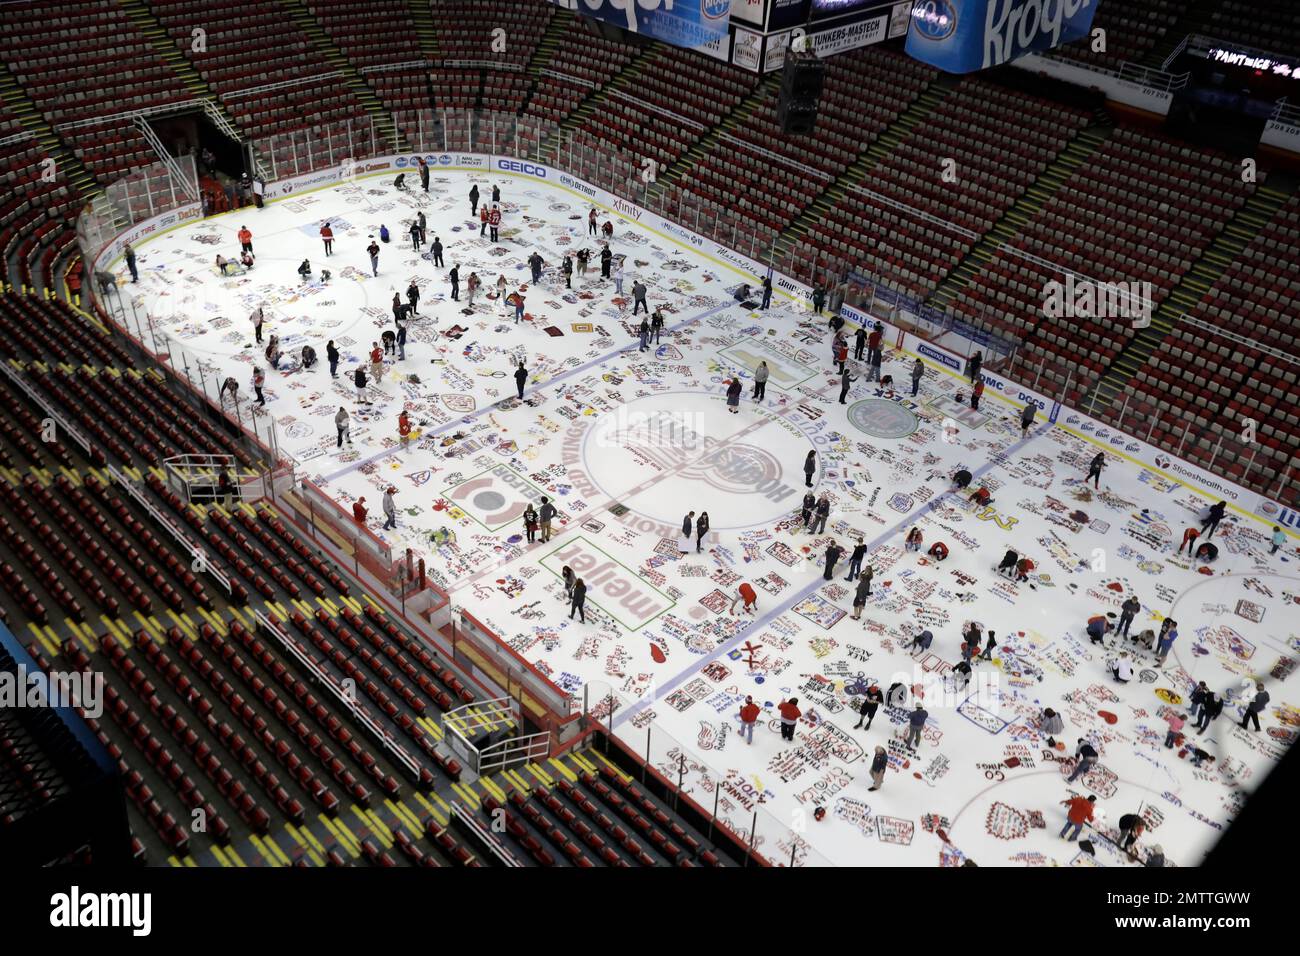 Detroit Red Wings fans paint tributes on the ice at the Joe Louis